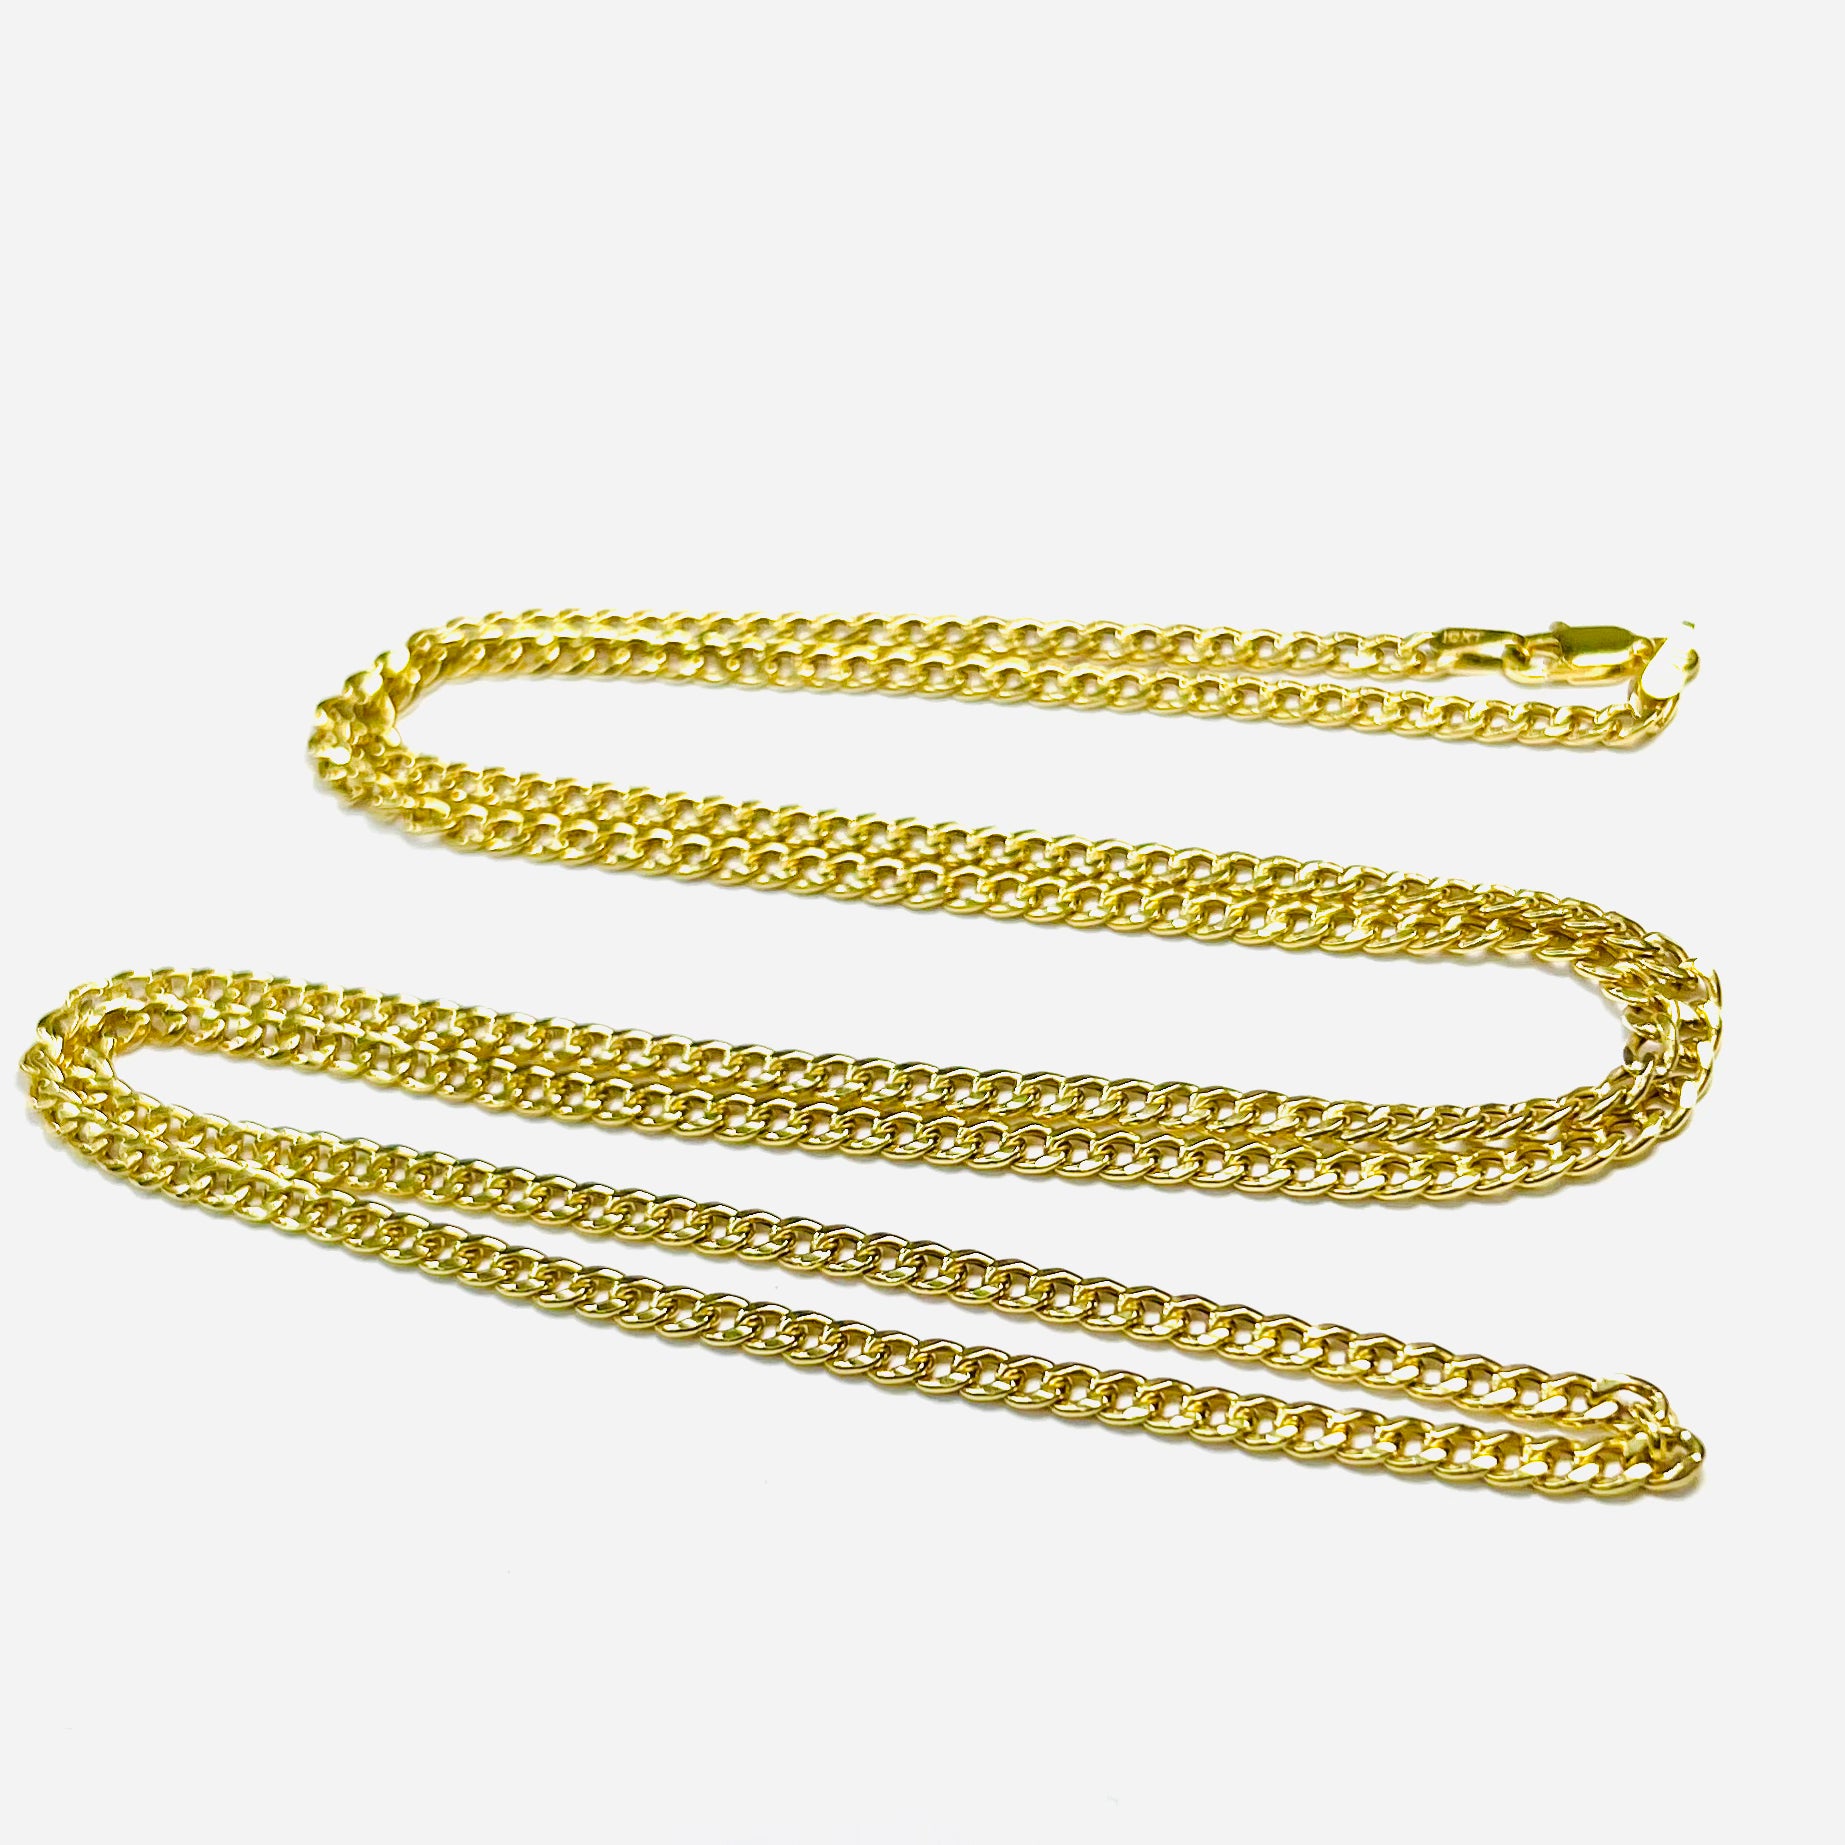 28" 3mm 10K Yellow Gold Cuban Link Chain Necklace